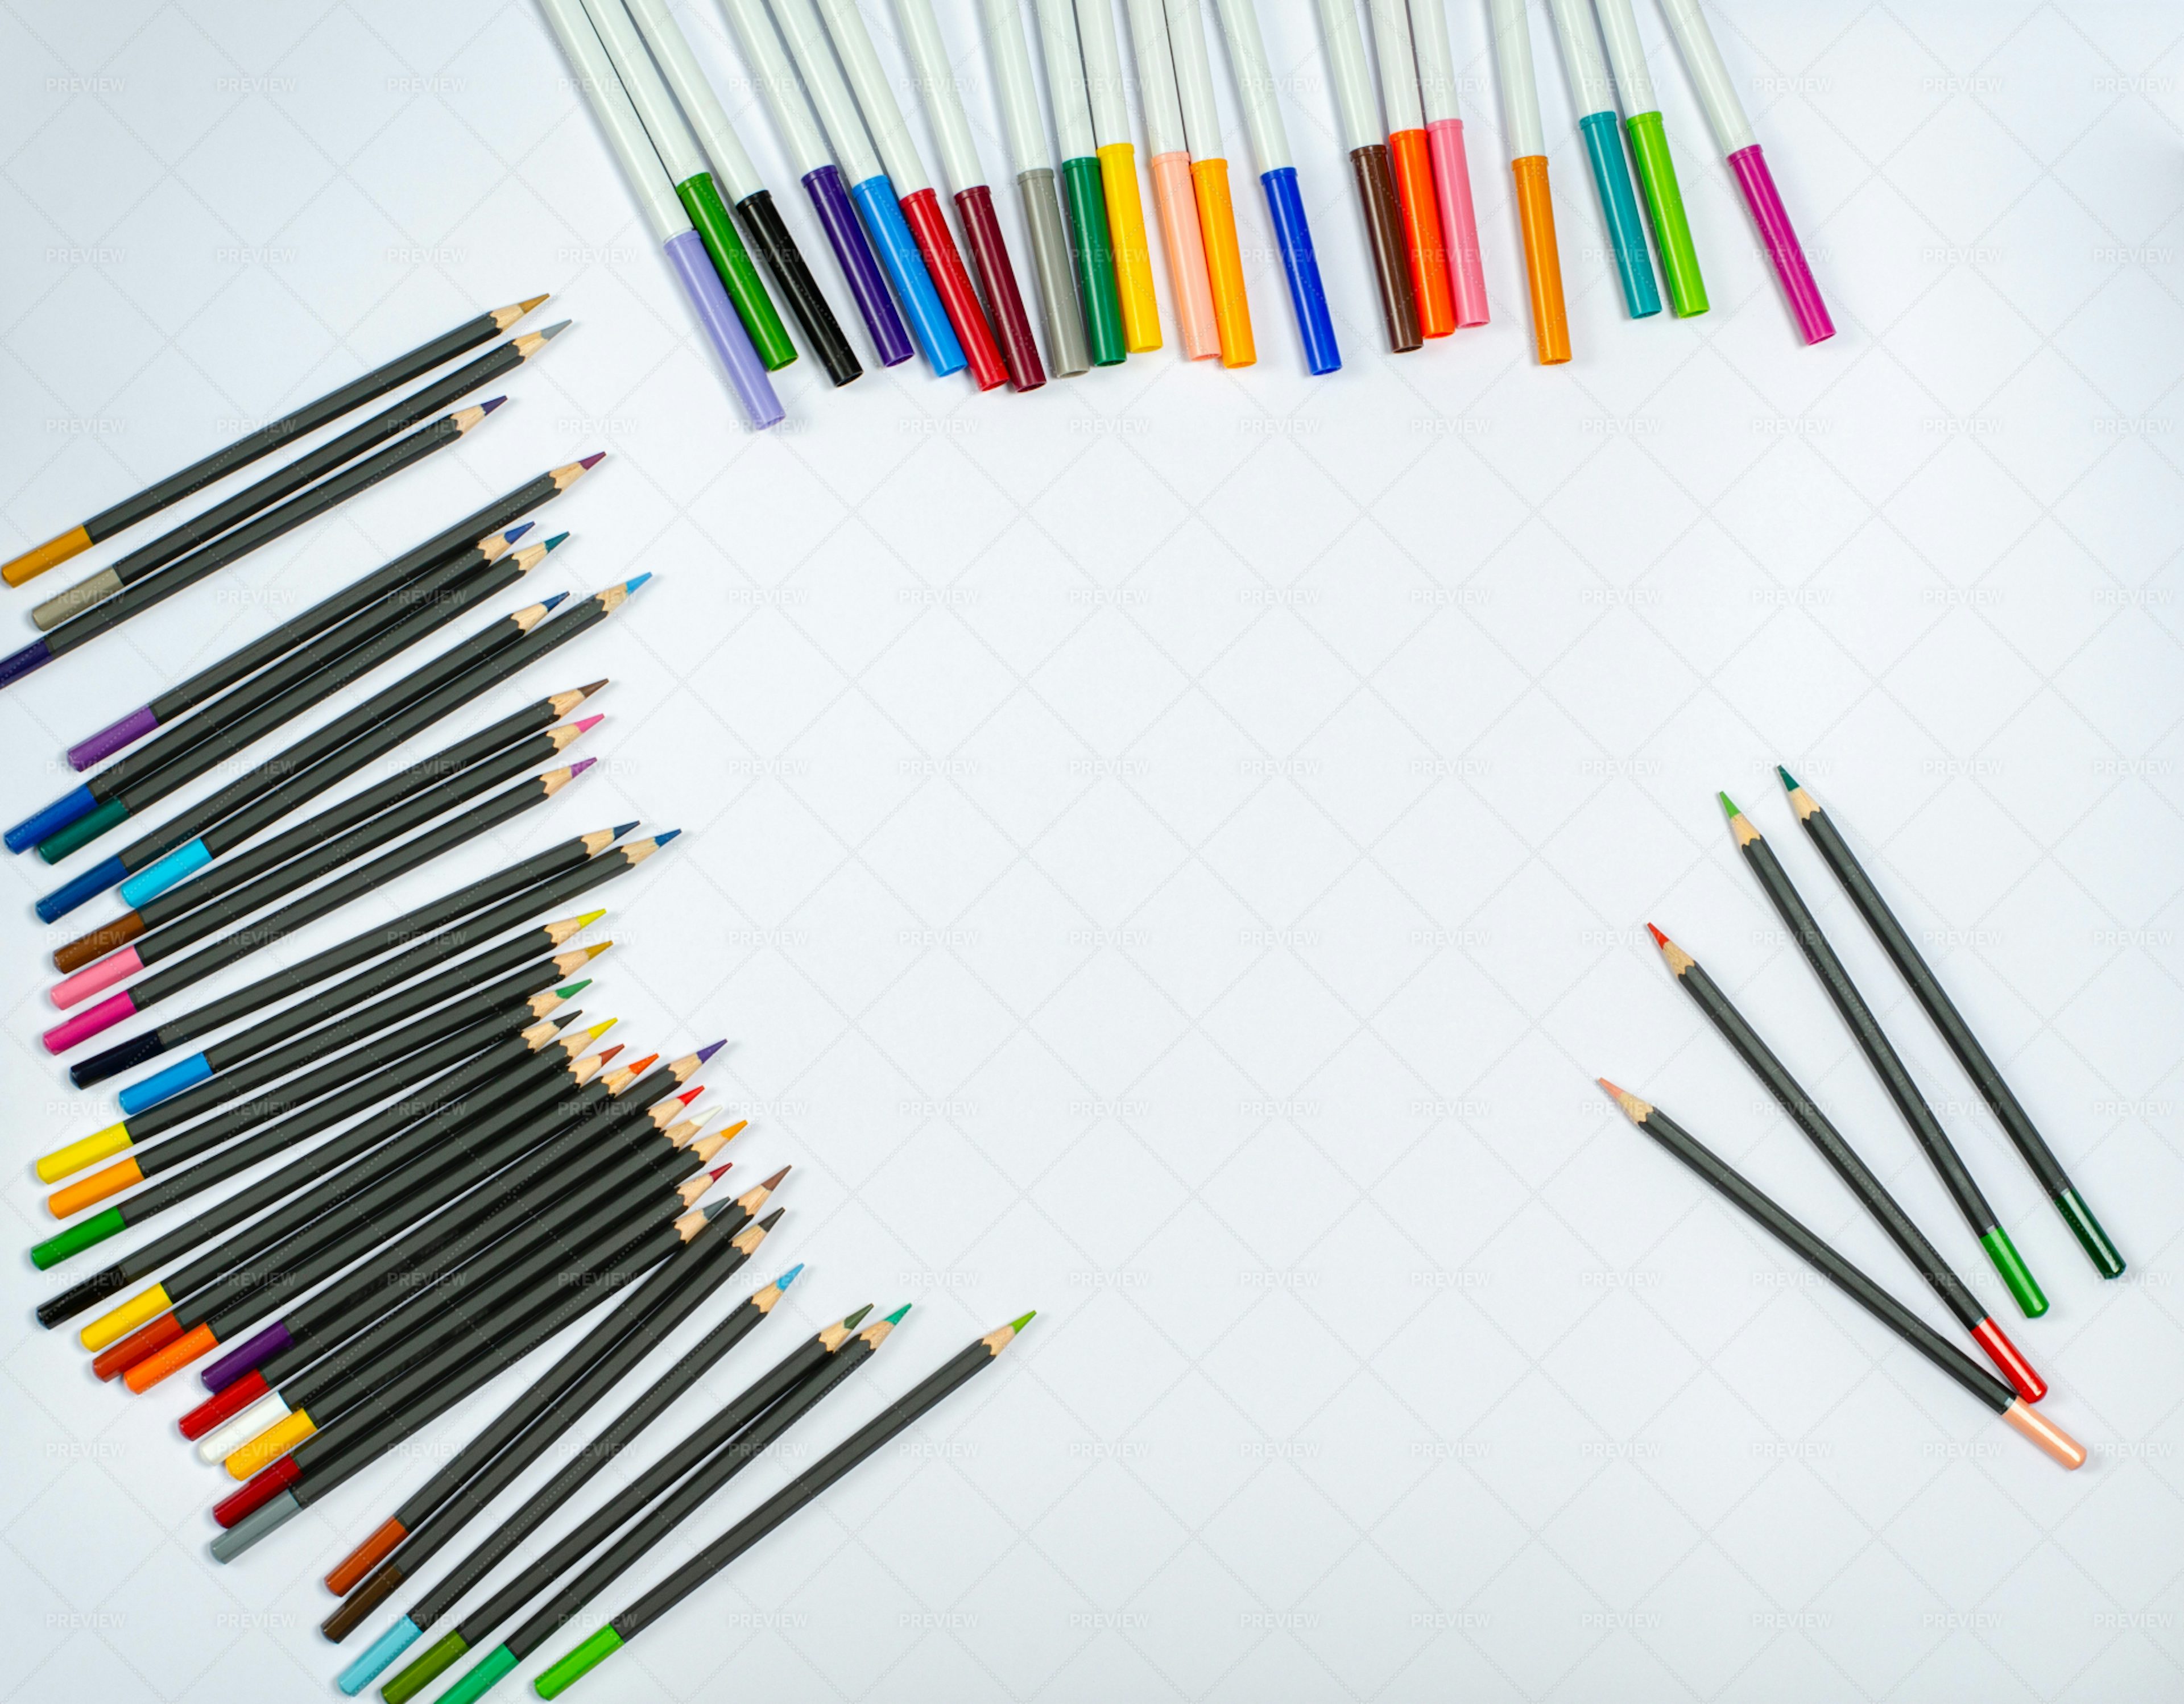 Colored Pencils And Markers - Stock Photos | Motion Array